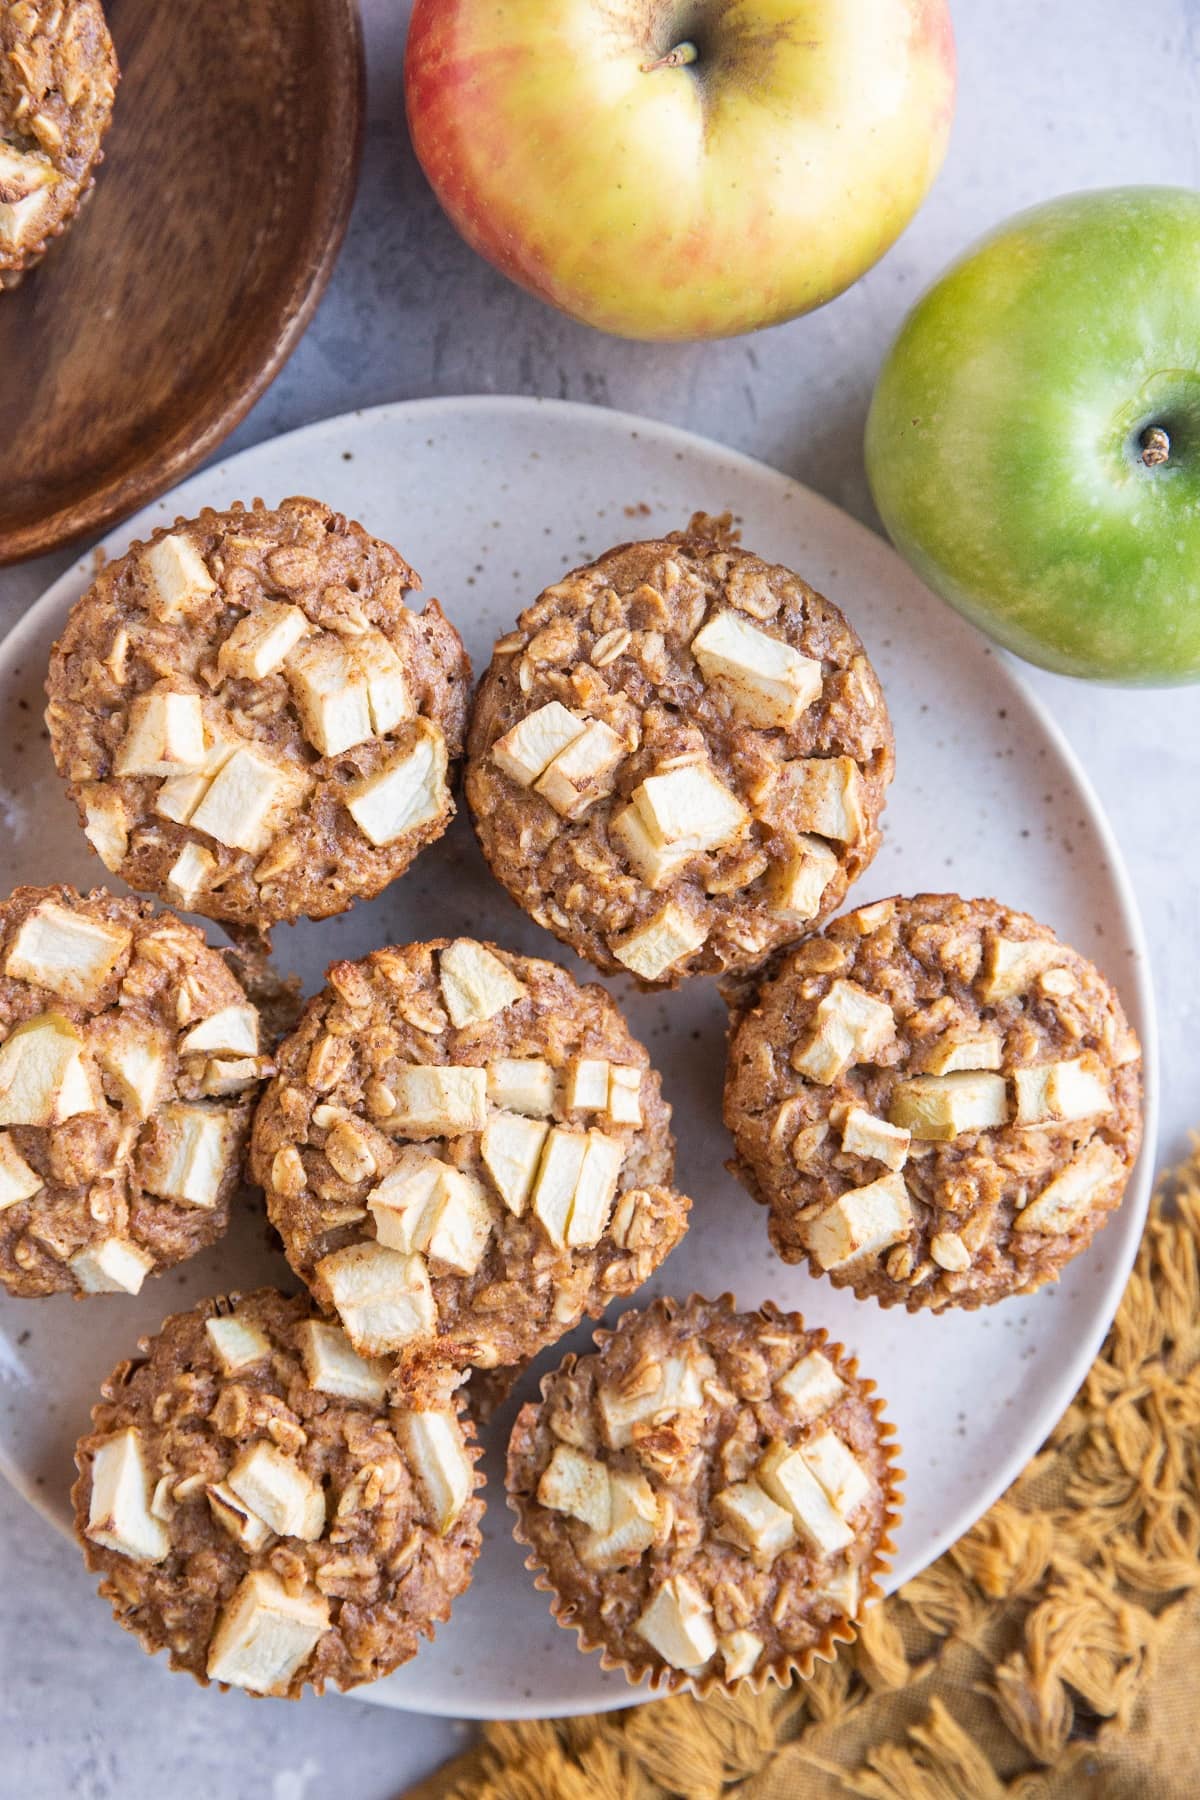 Plate of baked oatmeal cups with apples and a napkin to the side.